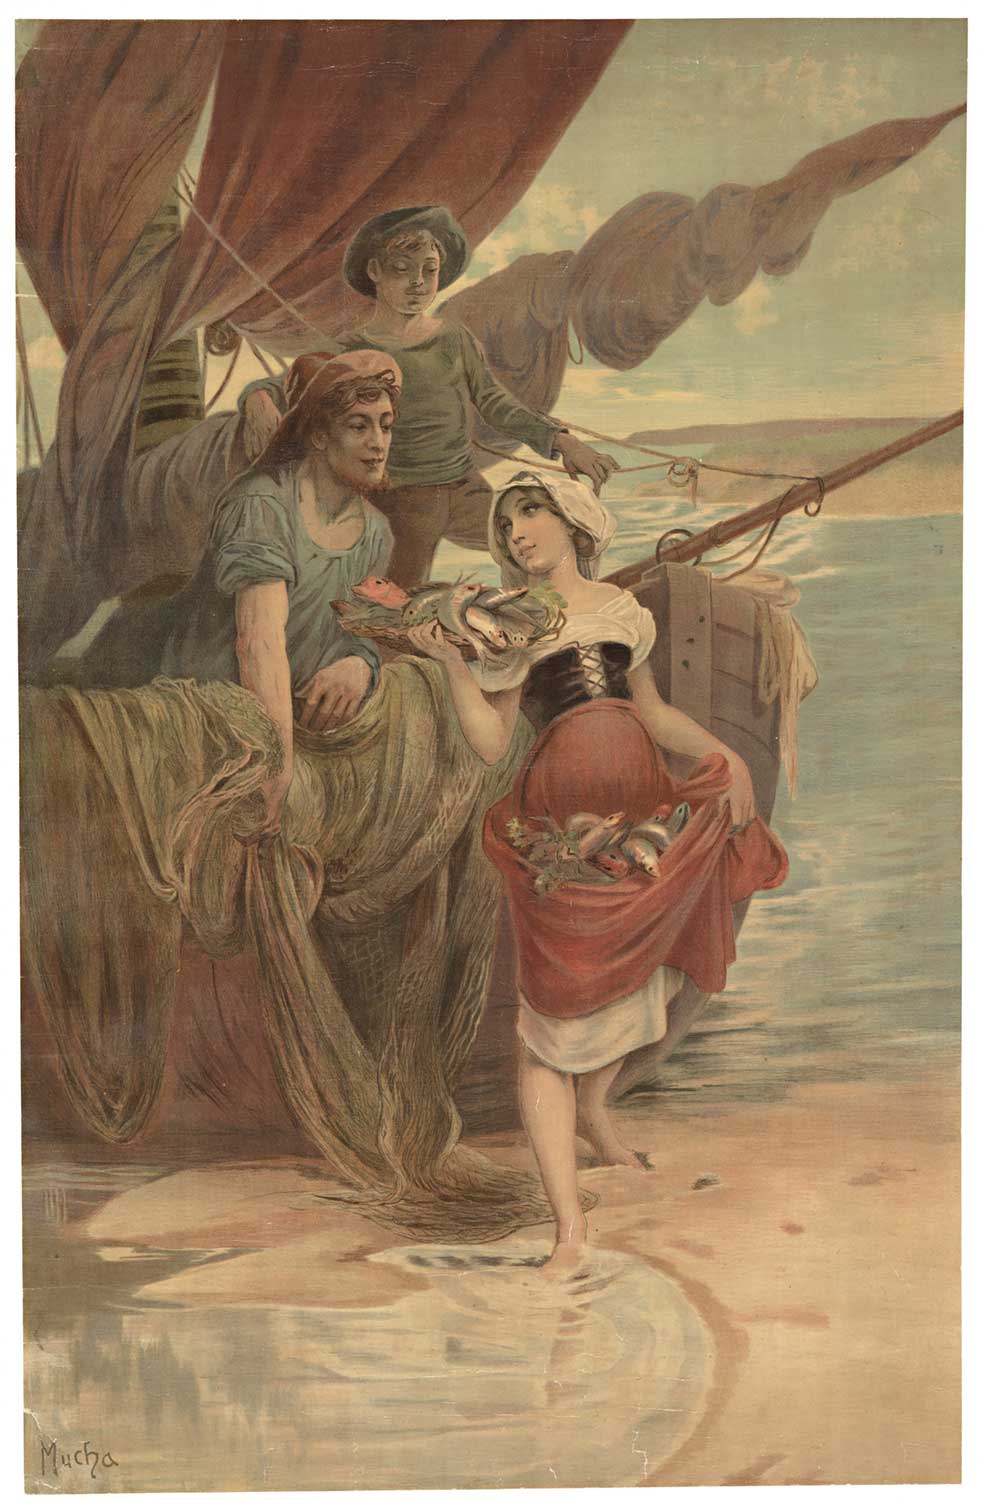 rare Mucha decorative panel. Women with fish next to an old fishing boat, sea side, linen backed, A- / B+ condition. Very Rare